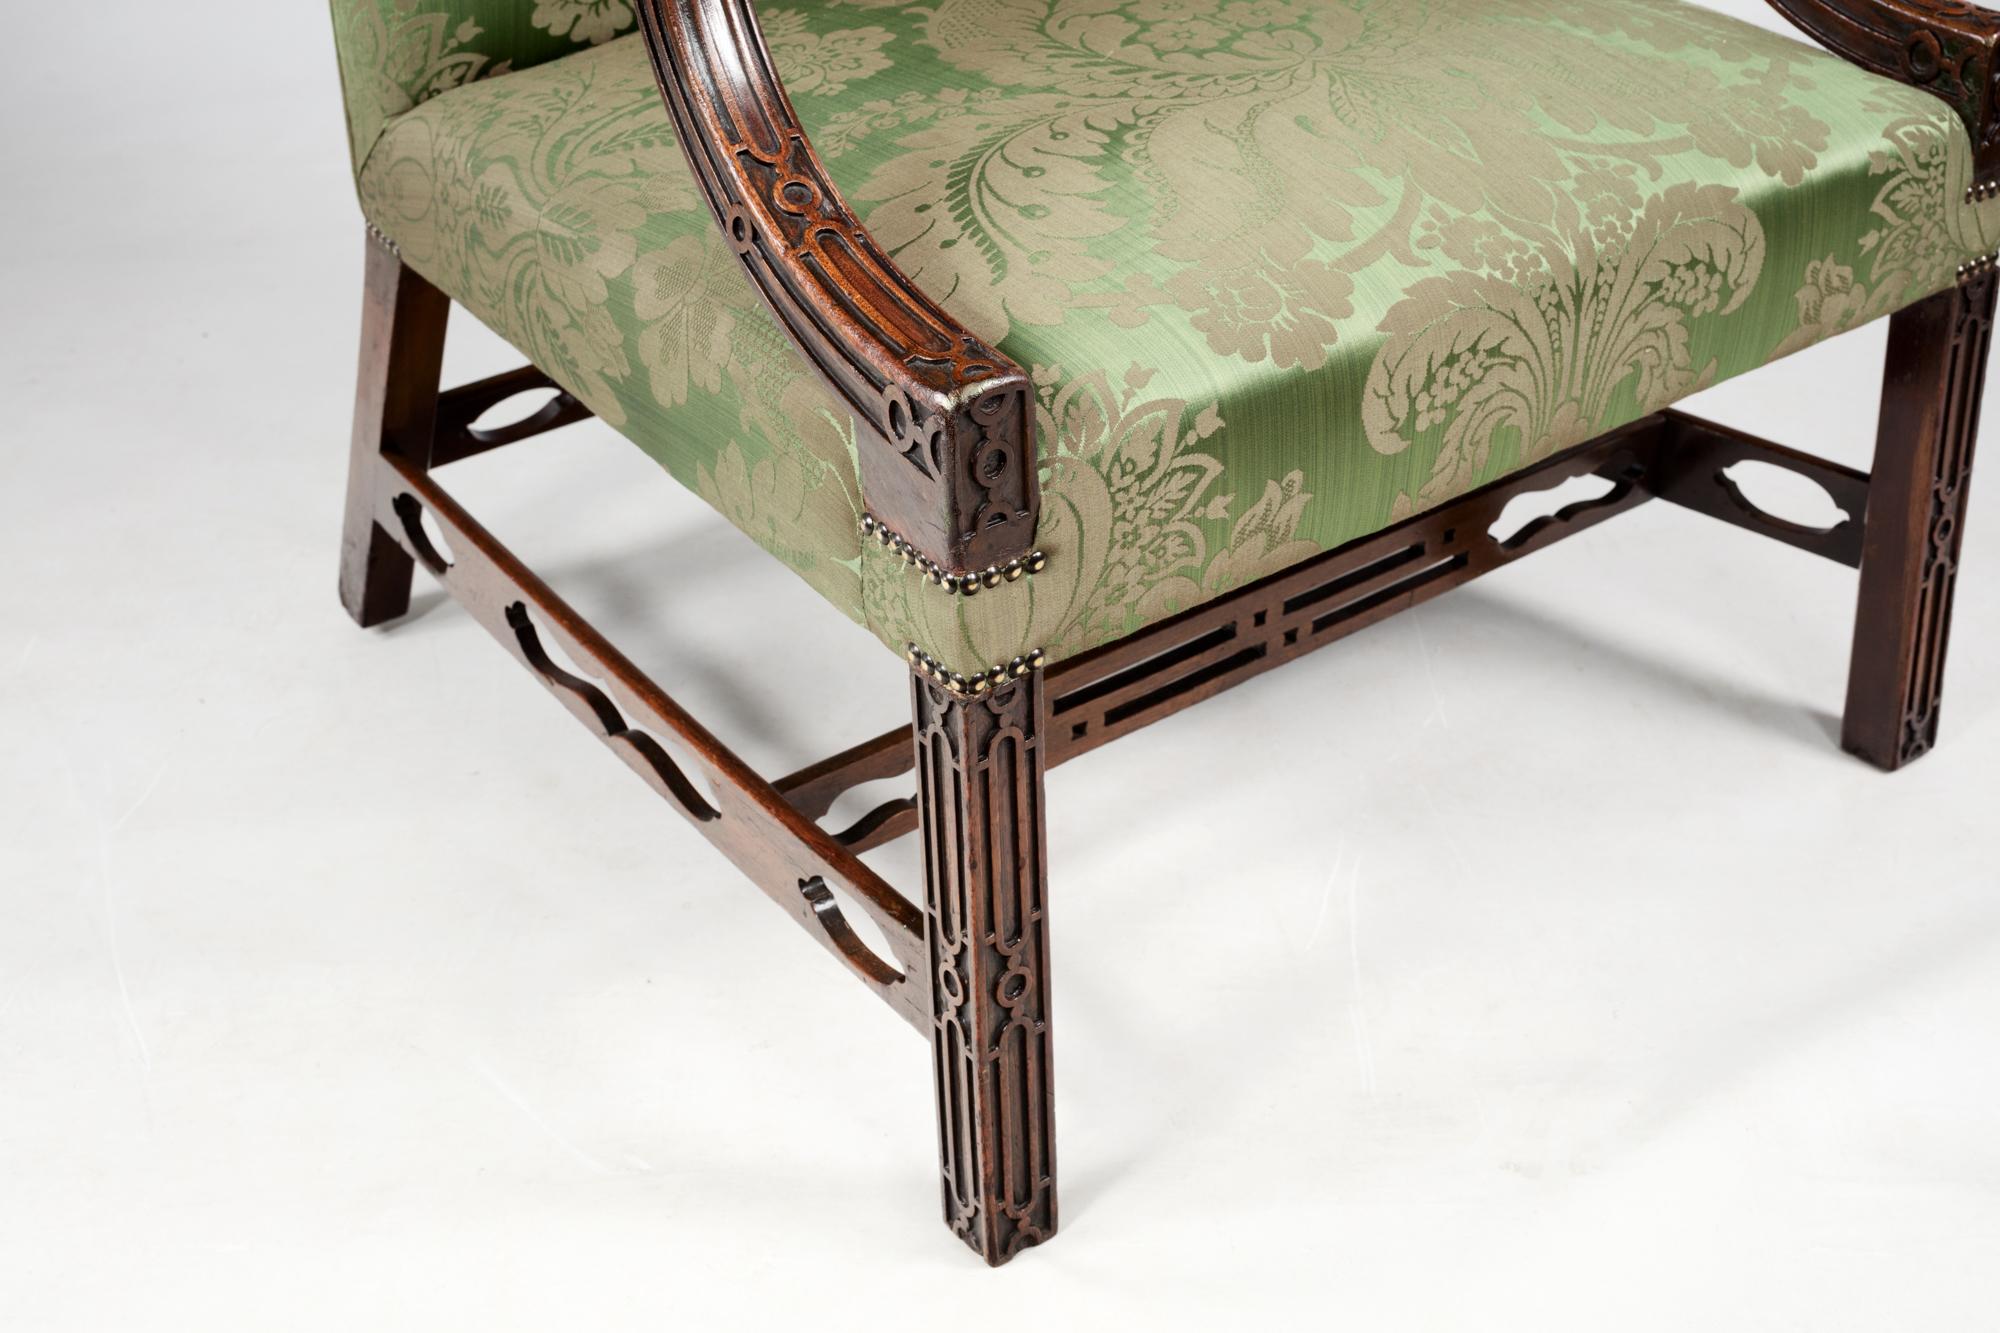 Pair of 18th century Chinese Chippendale-style armchairs with newly upholstered seats and backs in green damask fabric. This pair of chairs features blind fretwork on the arms and legs. Circa 1790.